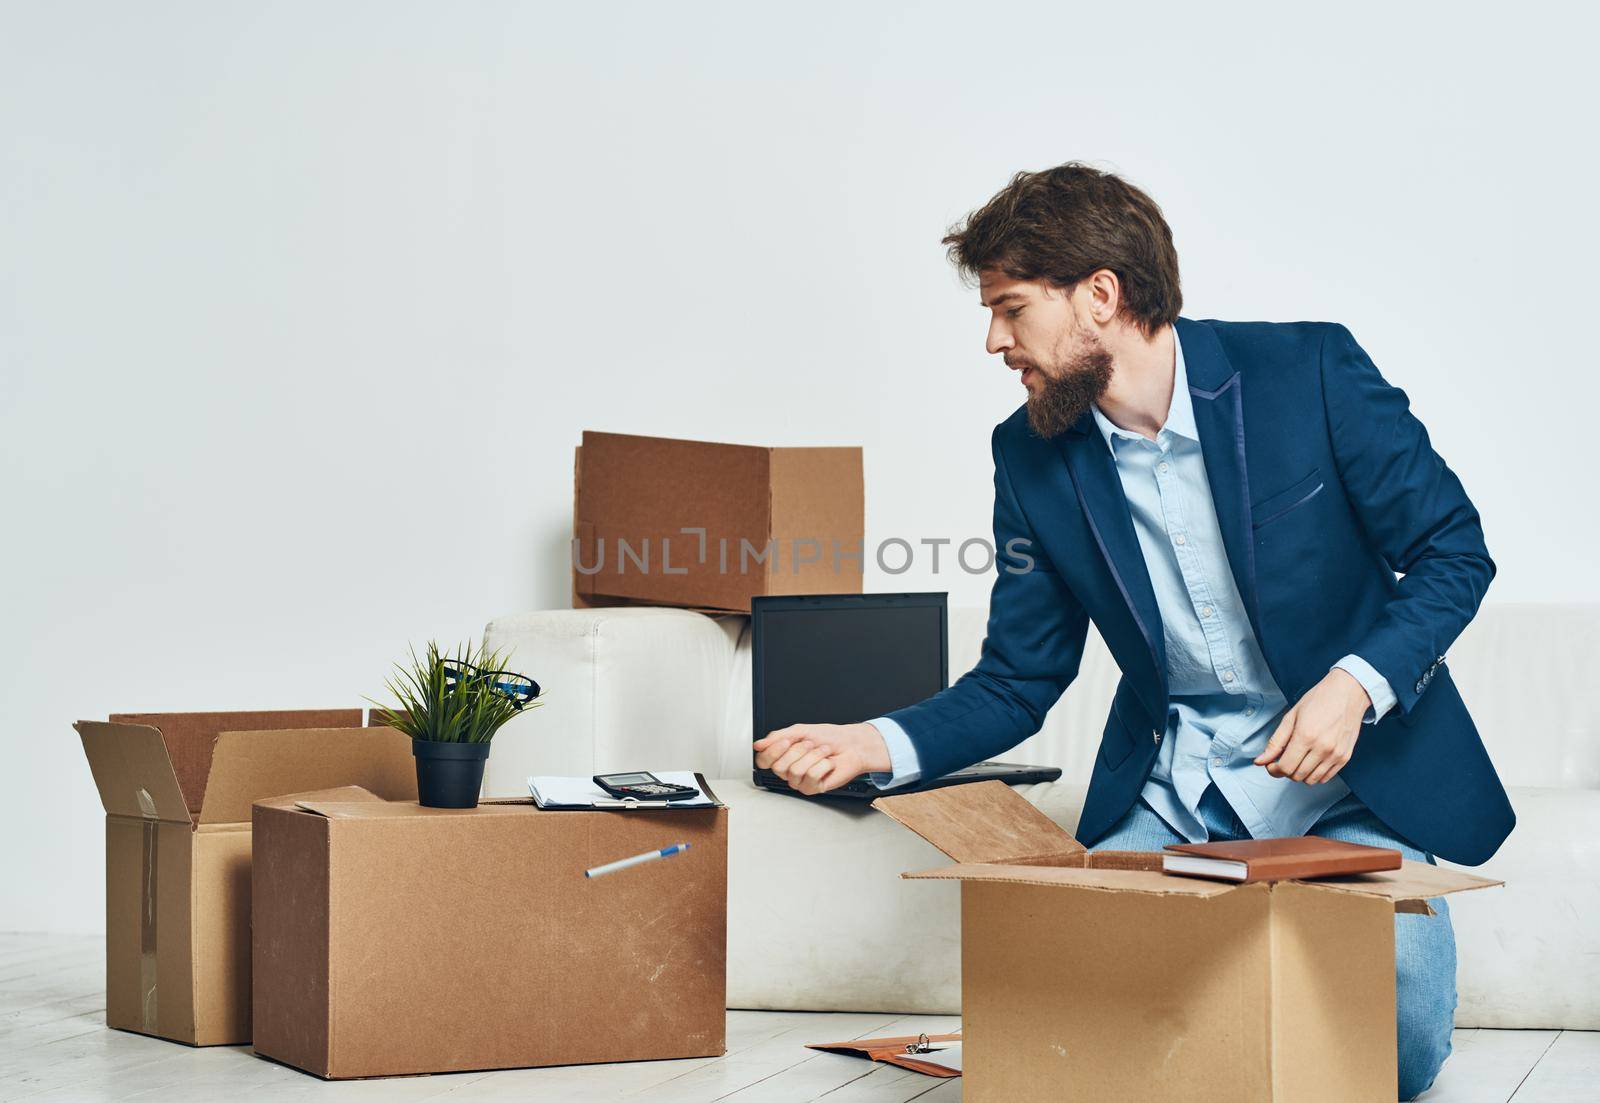 A man sits boxes with things unpacking a new professional job. High quality photo